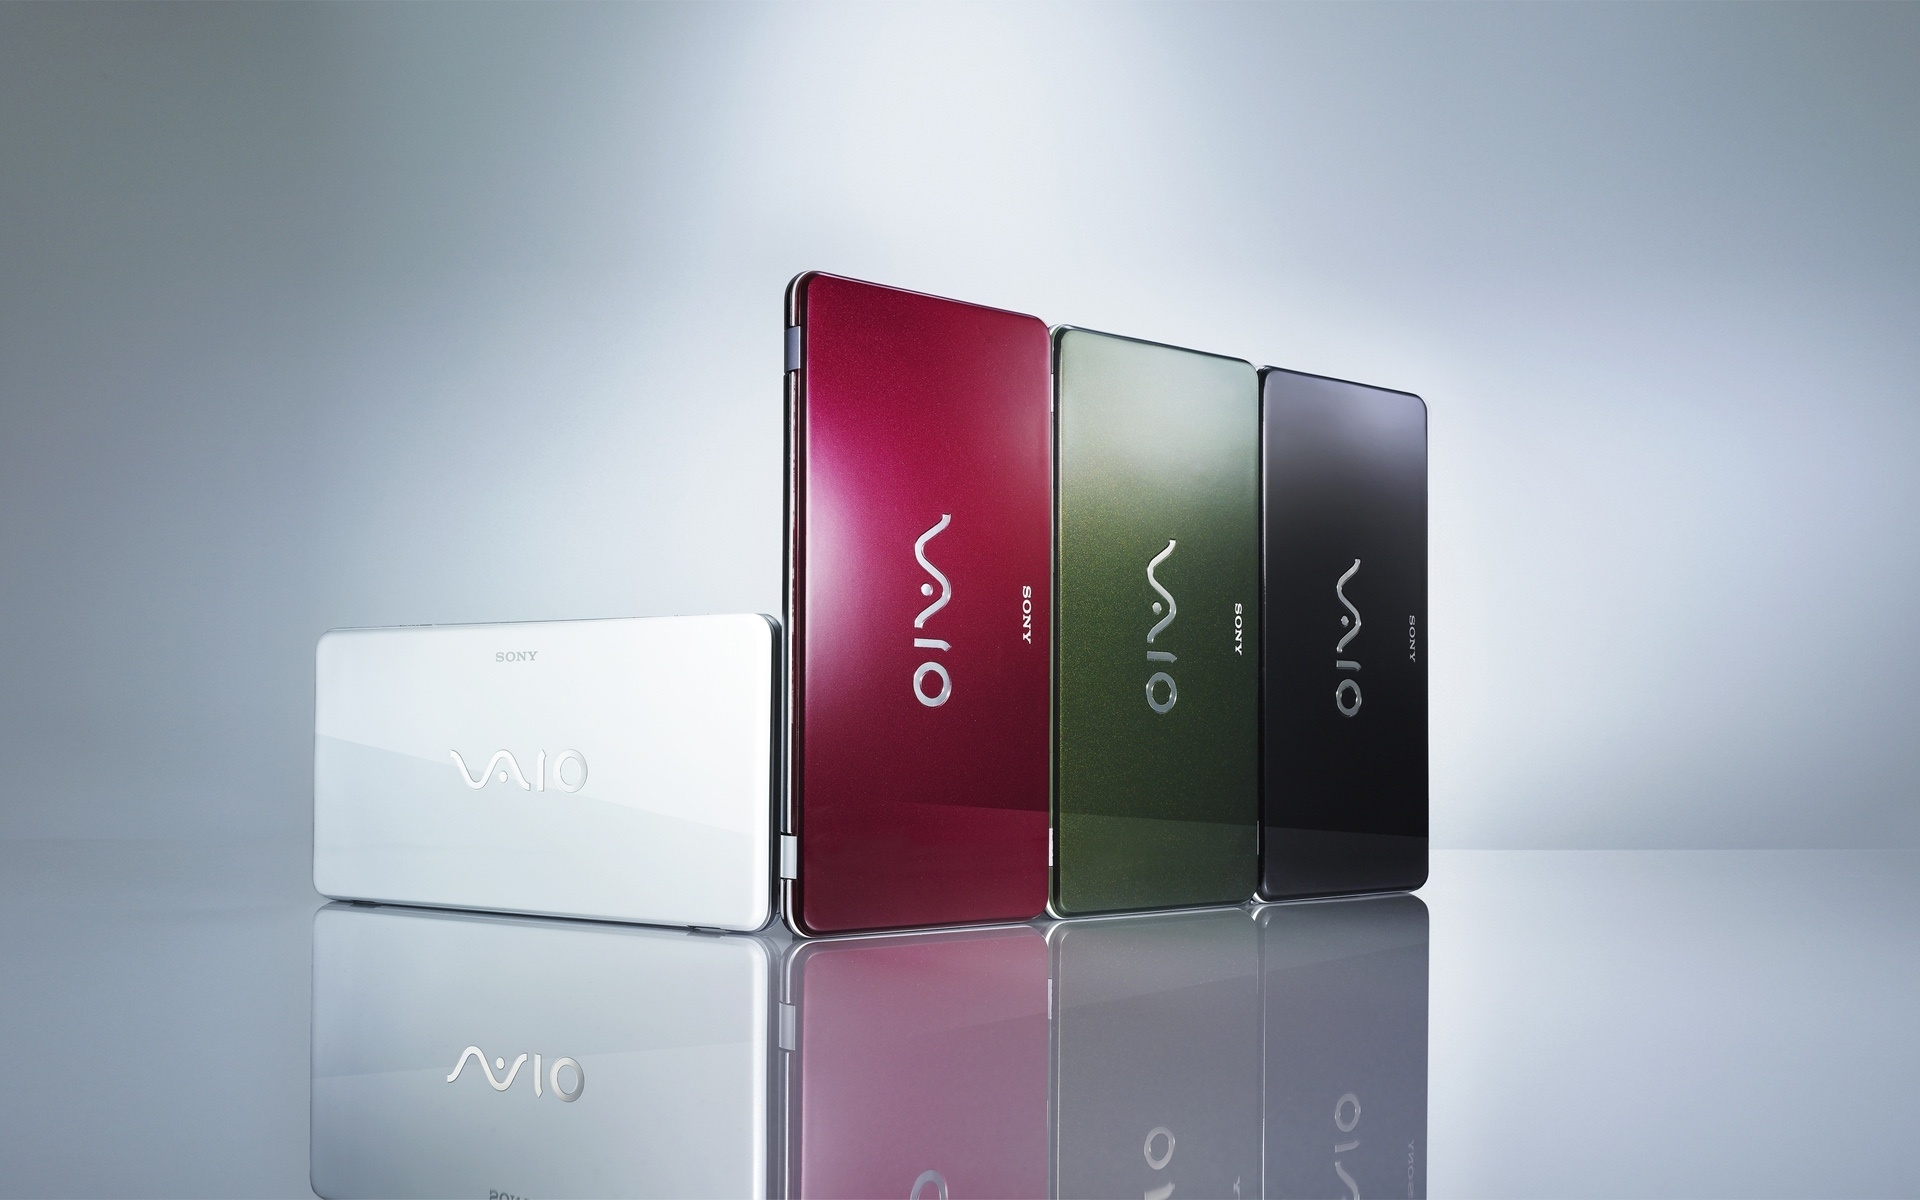 Sony Vaio 4 colors for 1920 x 1200 widescreen resolution